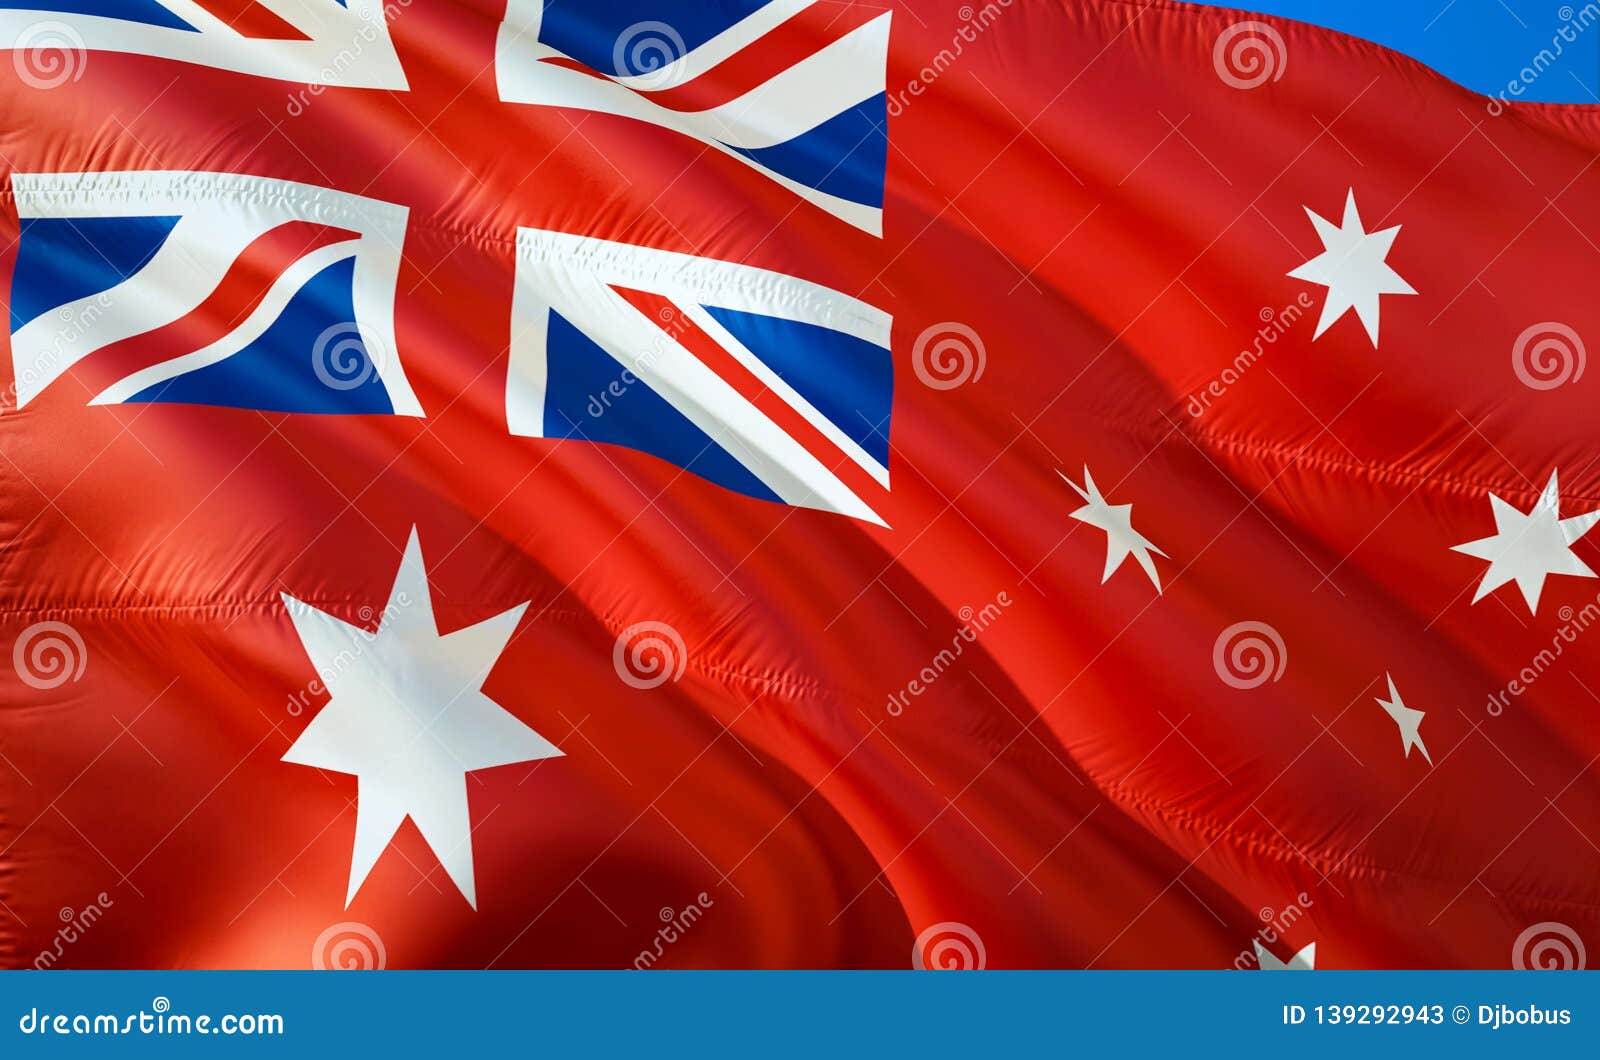 Flag of Australia Red Ensign. 3D Waving Flag Design. the National Symbol of Australia Red Ensign, 3D Rendering. National Colors Stock Image - Image of color: 139292943